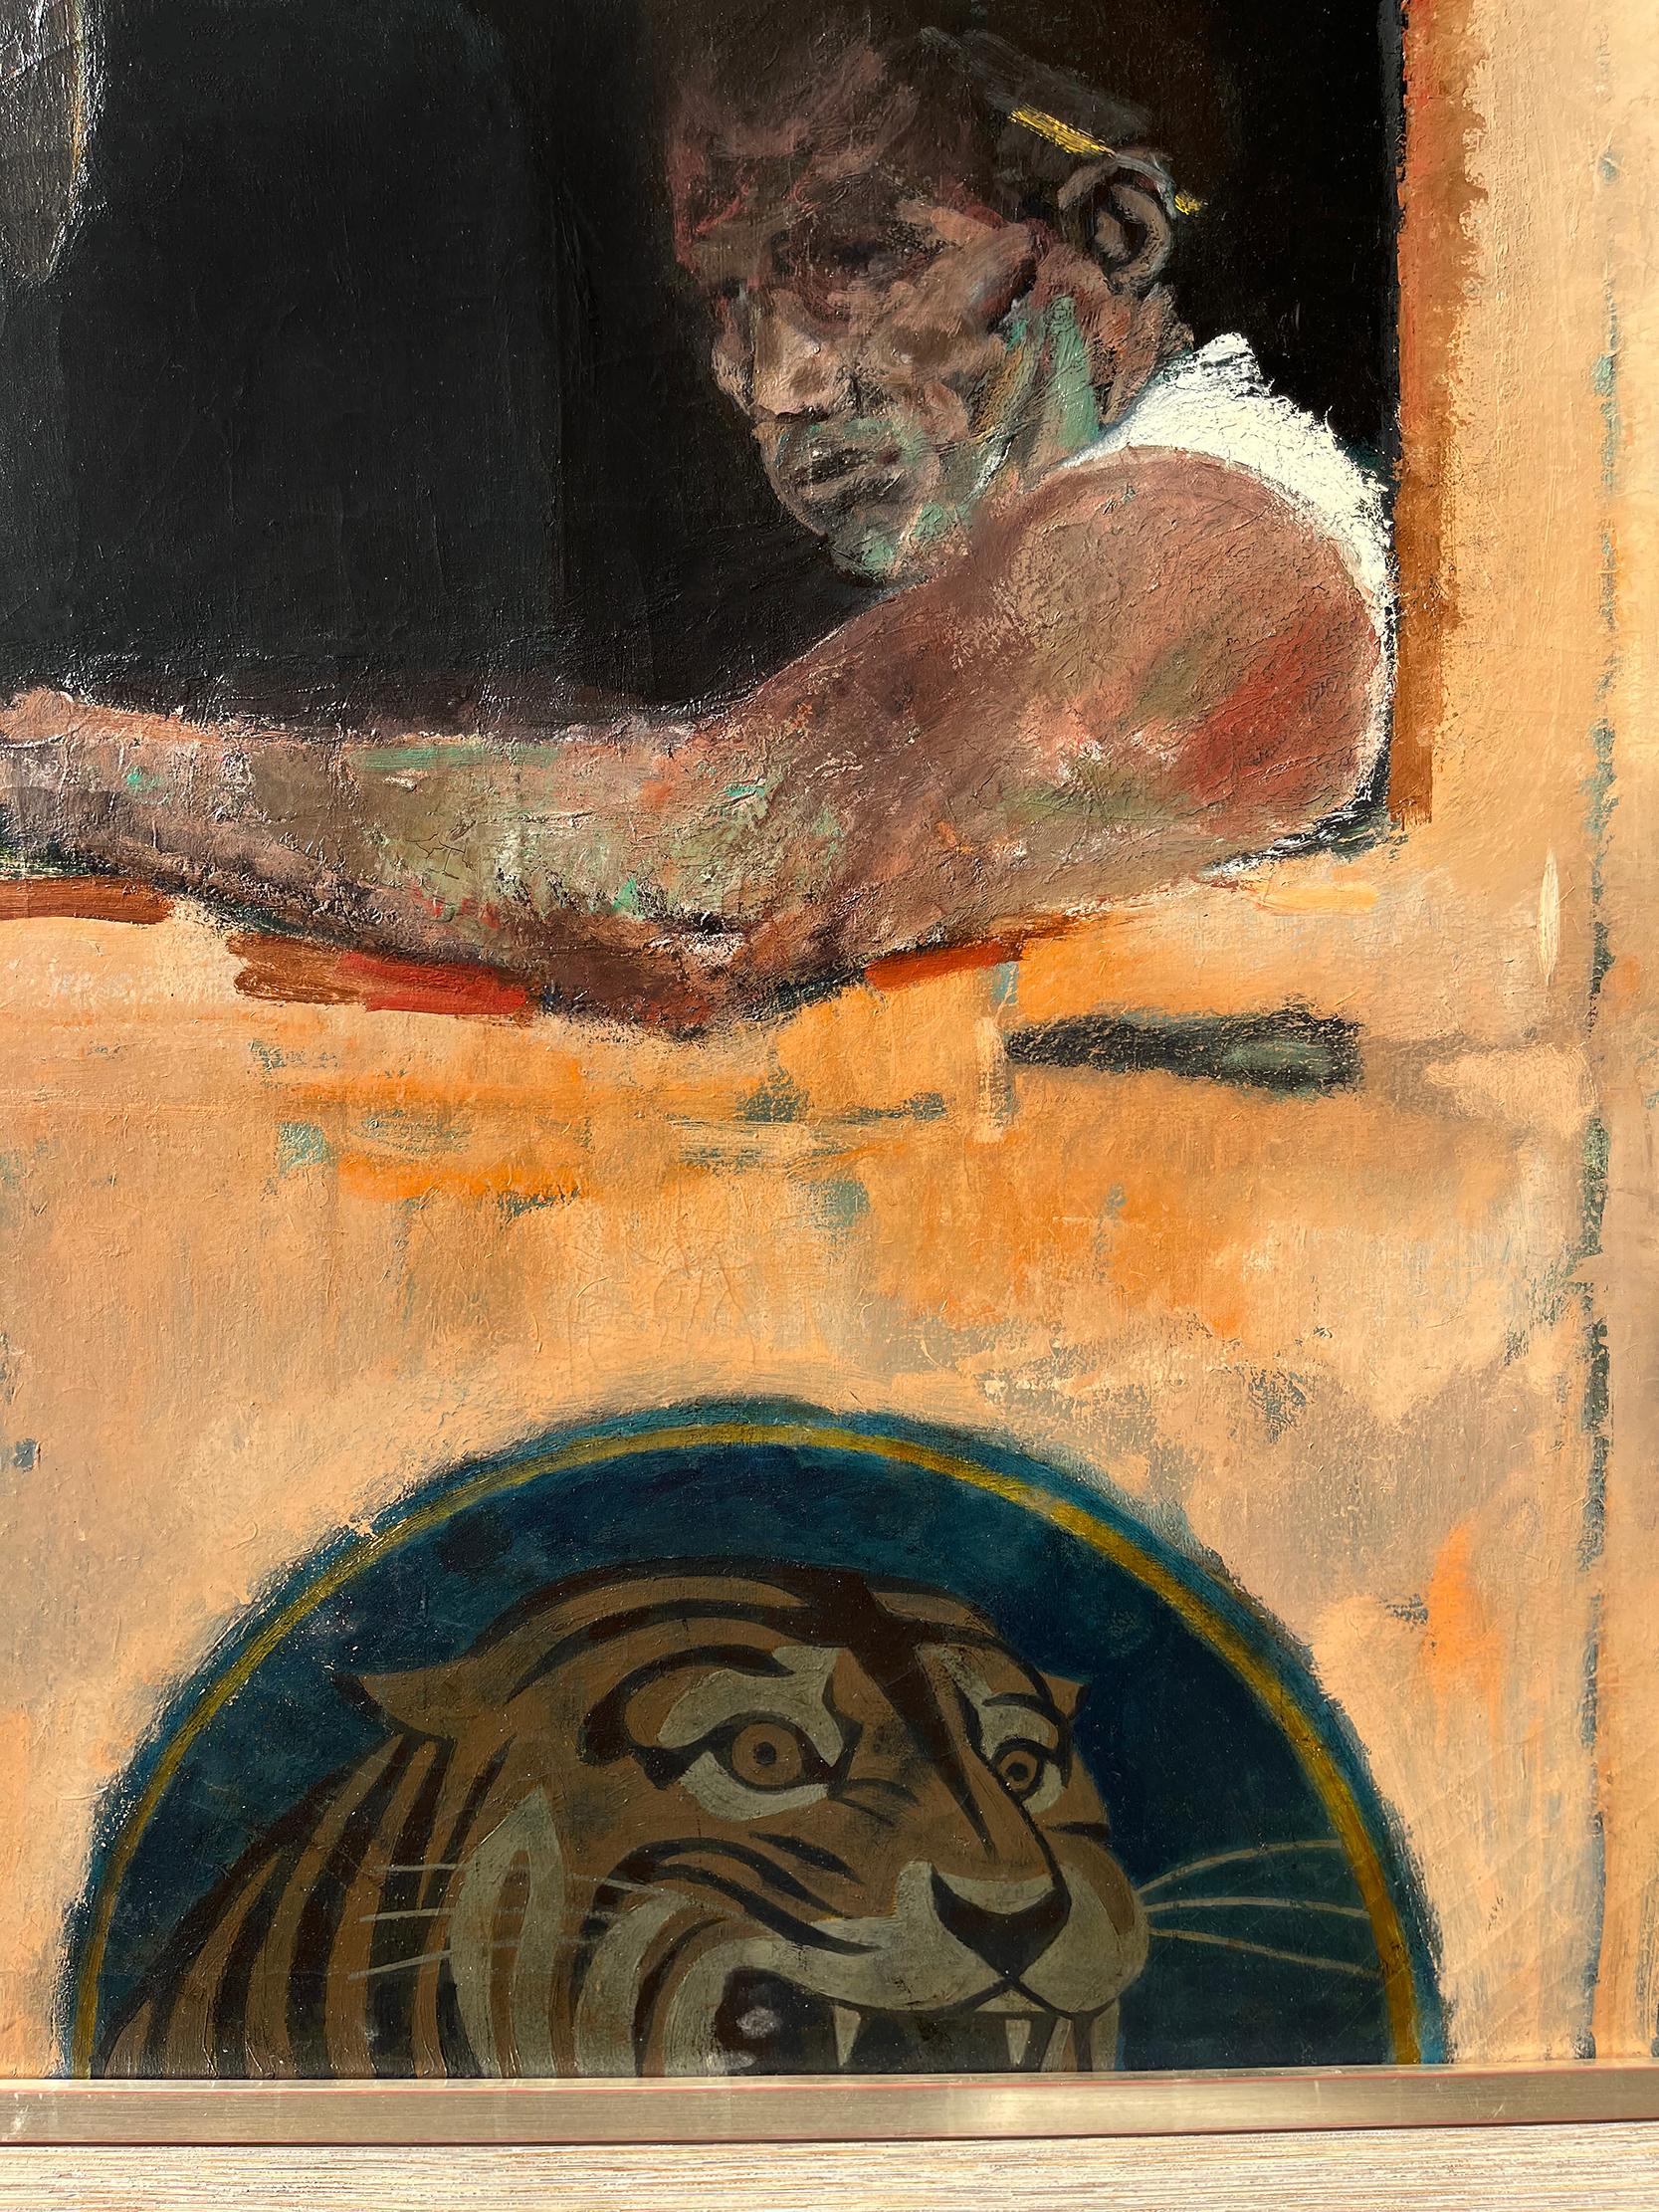 Blue Collar Gritty Truck Driver with Tiger - Color field meets Social Realism  - Painting by Joseph Hirsch